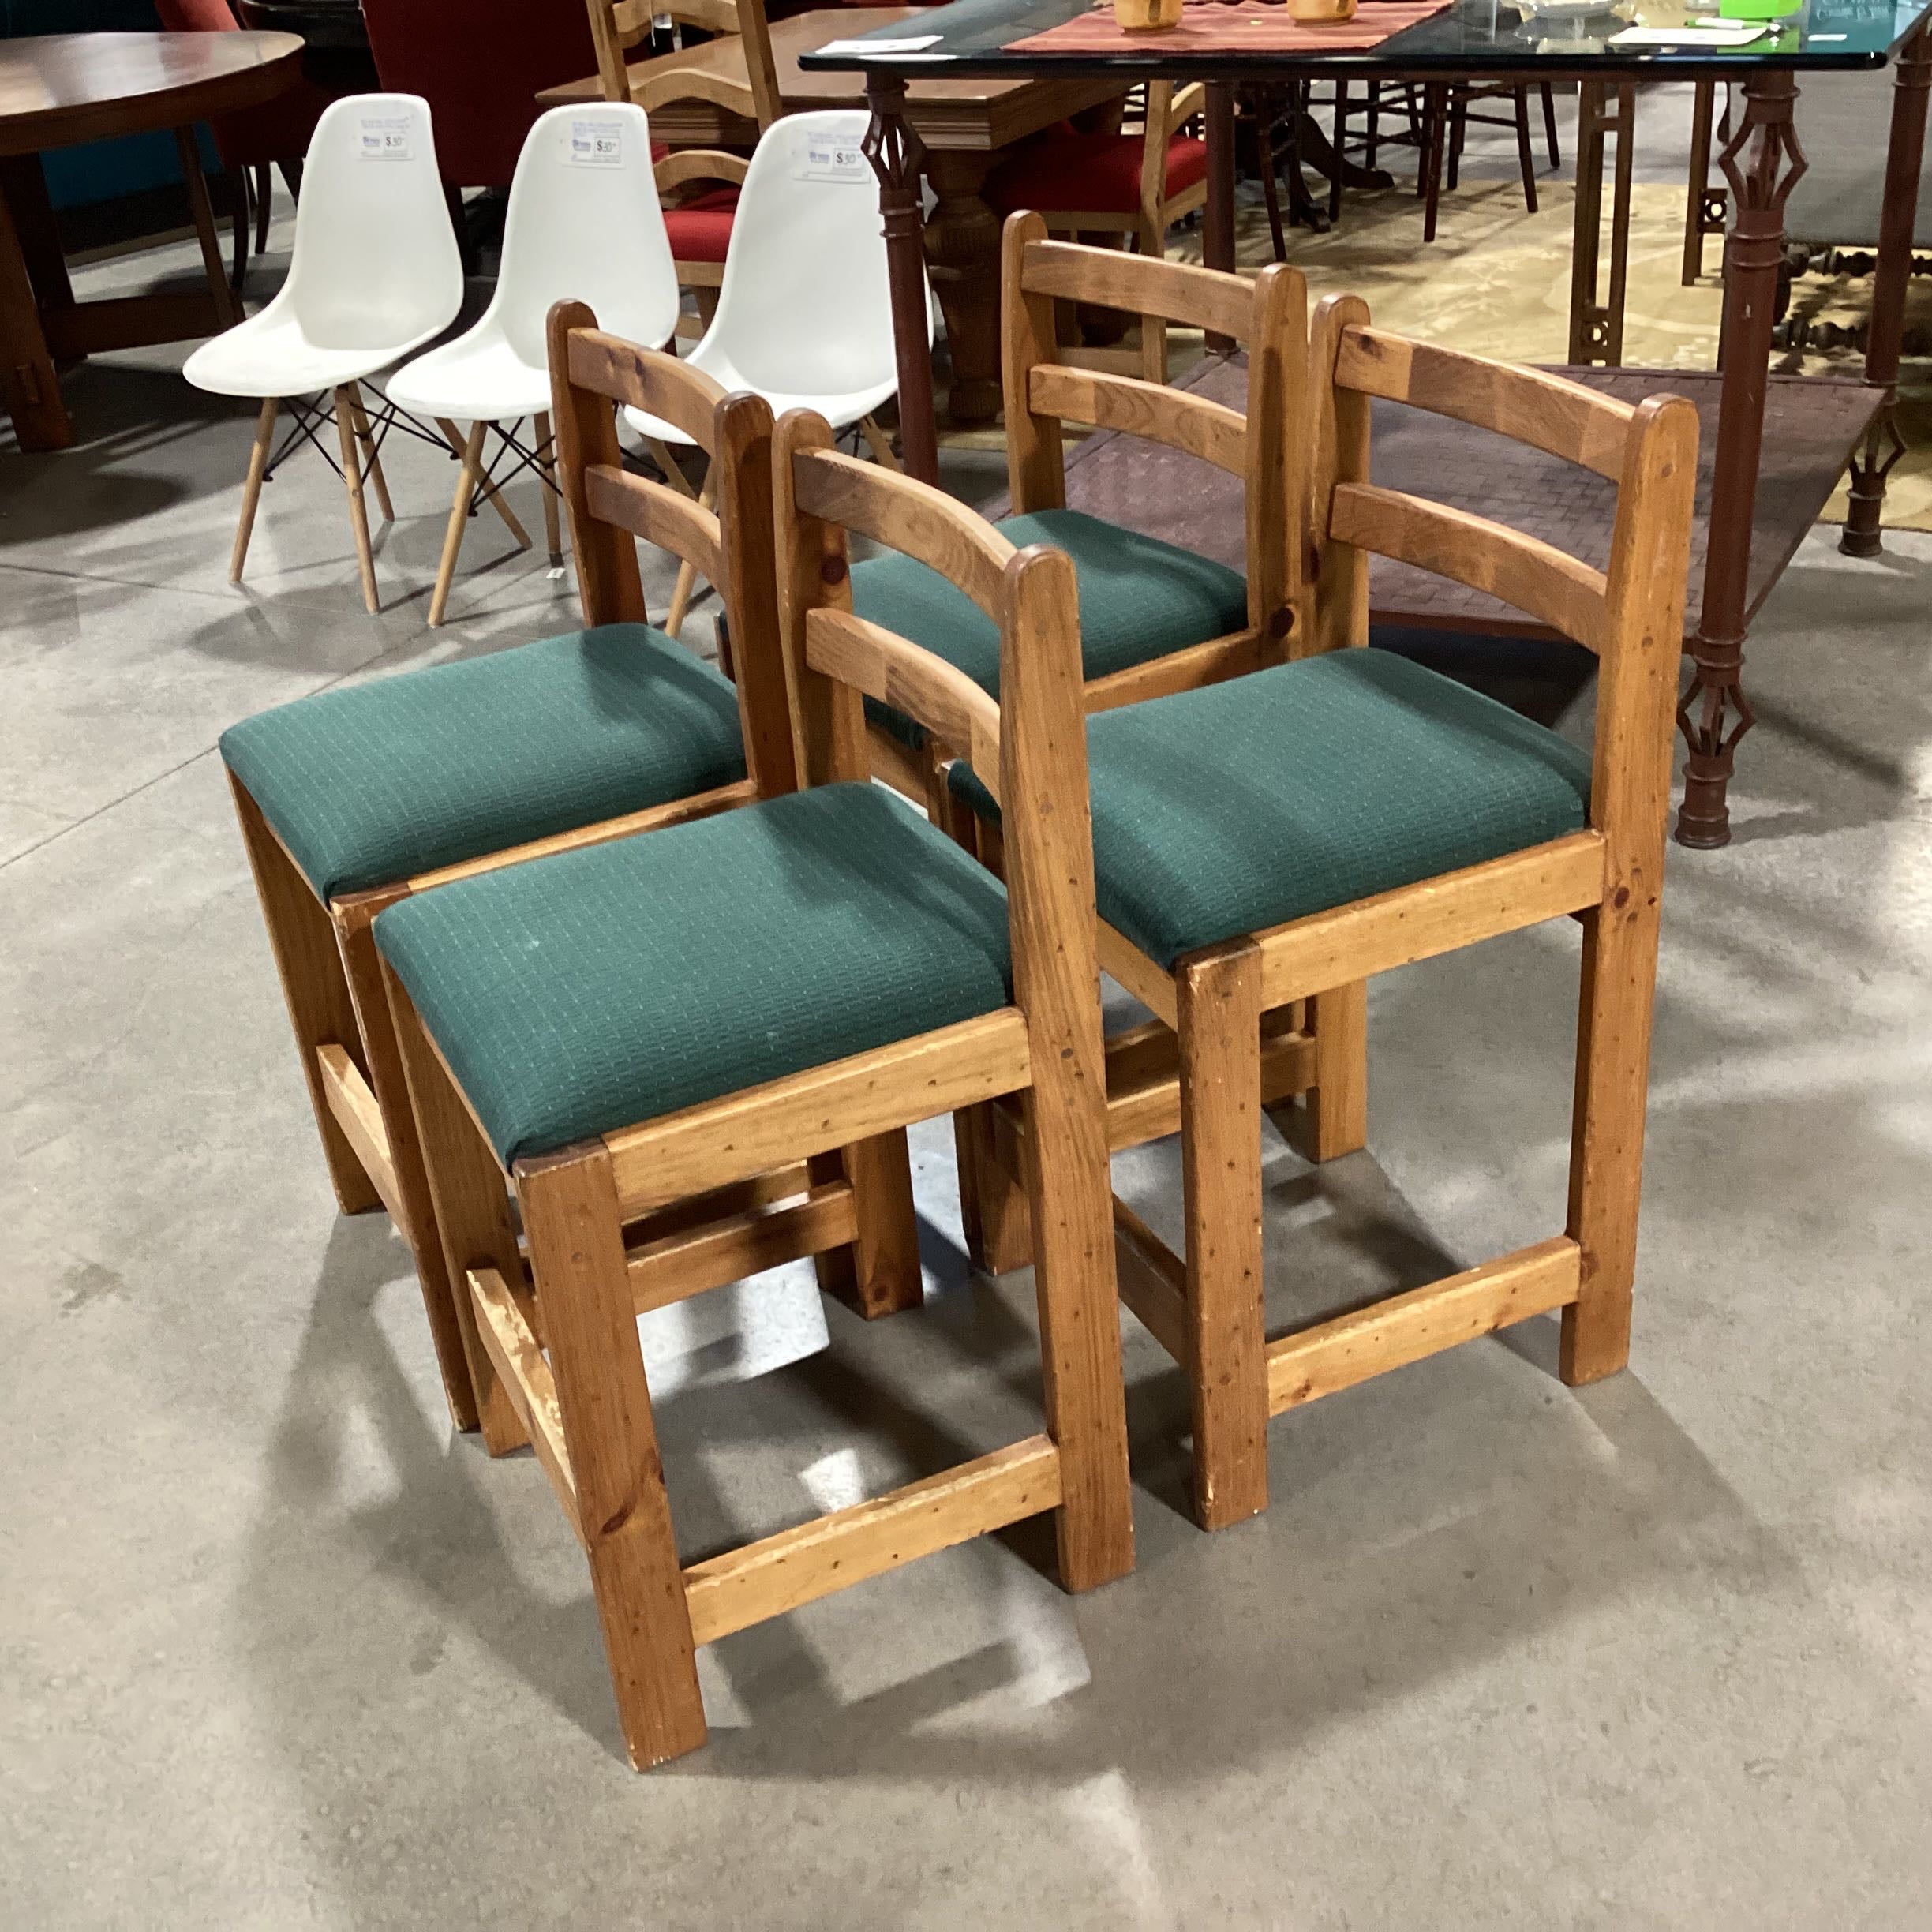 Set of 4 Distressed Pine & Forest Green Seat Barstools